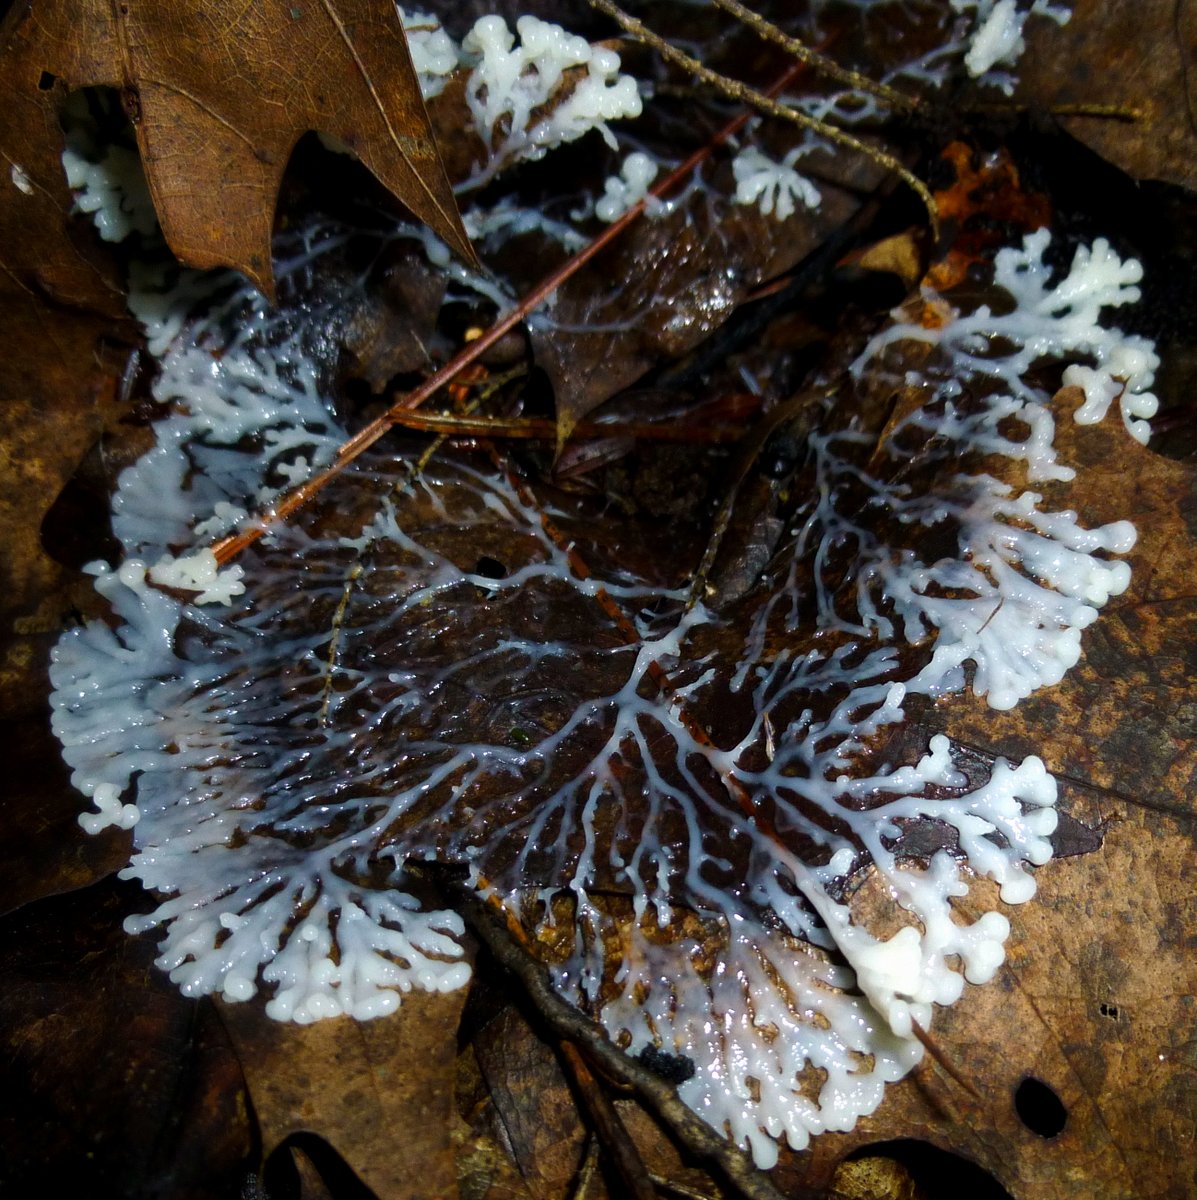 6. Unknown White Slime Mold